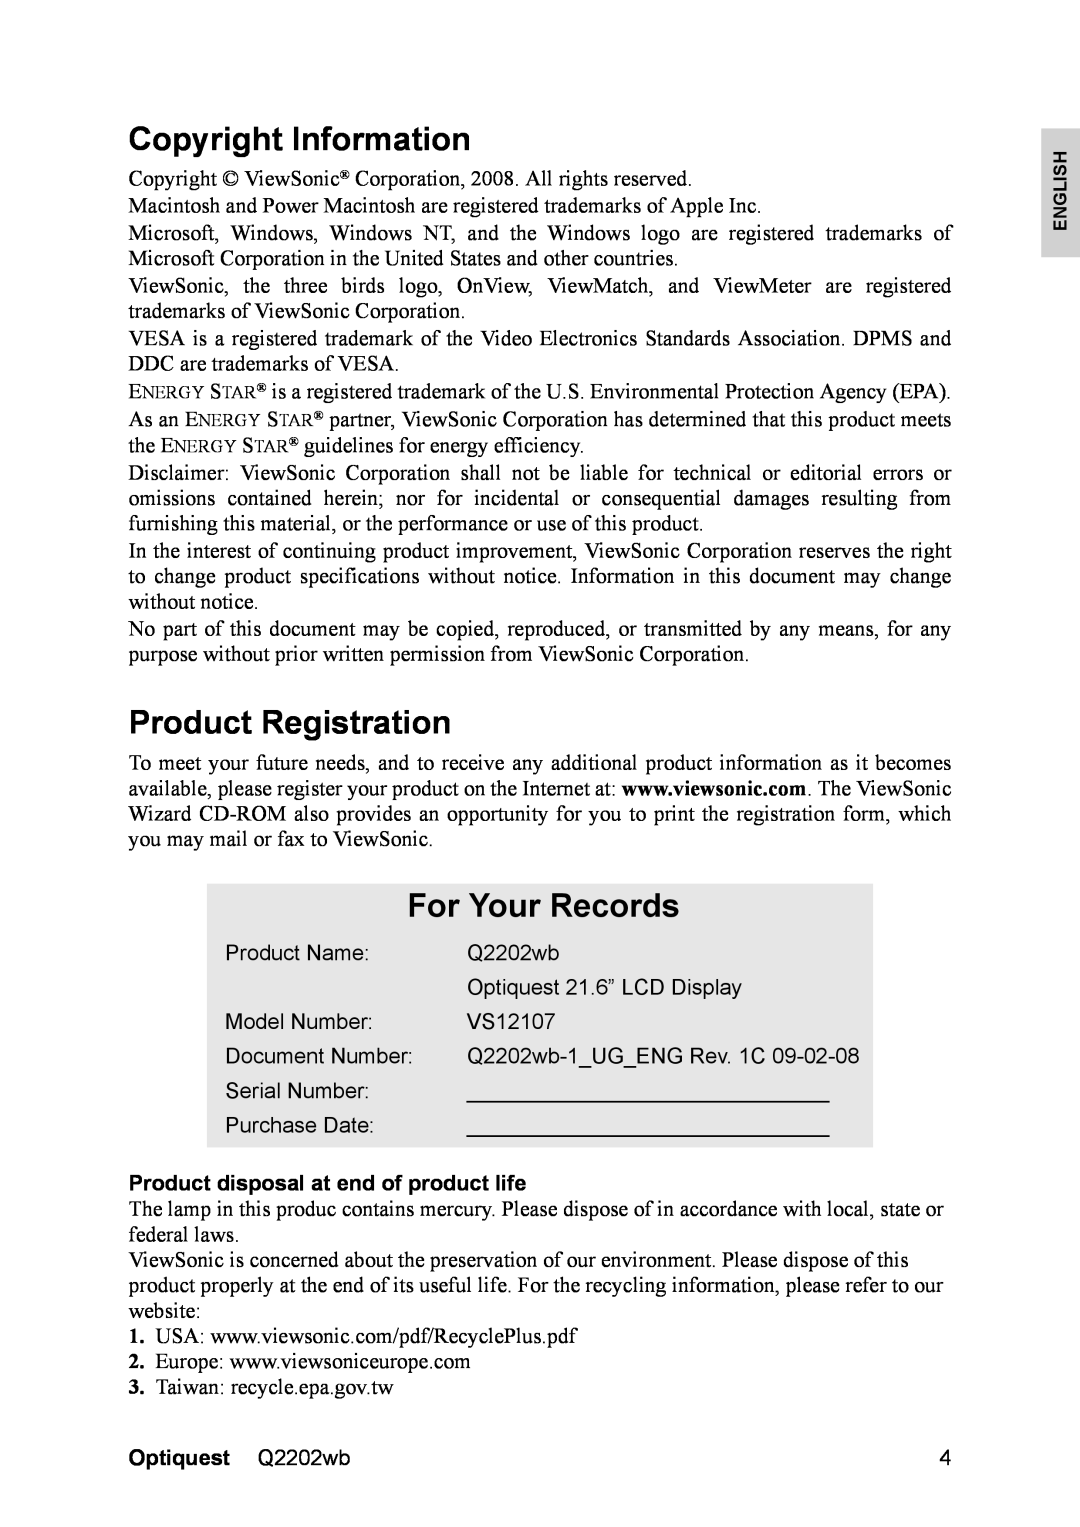 ViewSonic VS12107 Copyright Information, Product Registration, For Your Records, Product disposal at end of product life 